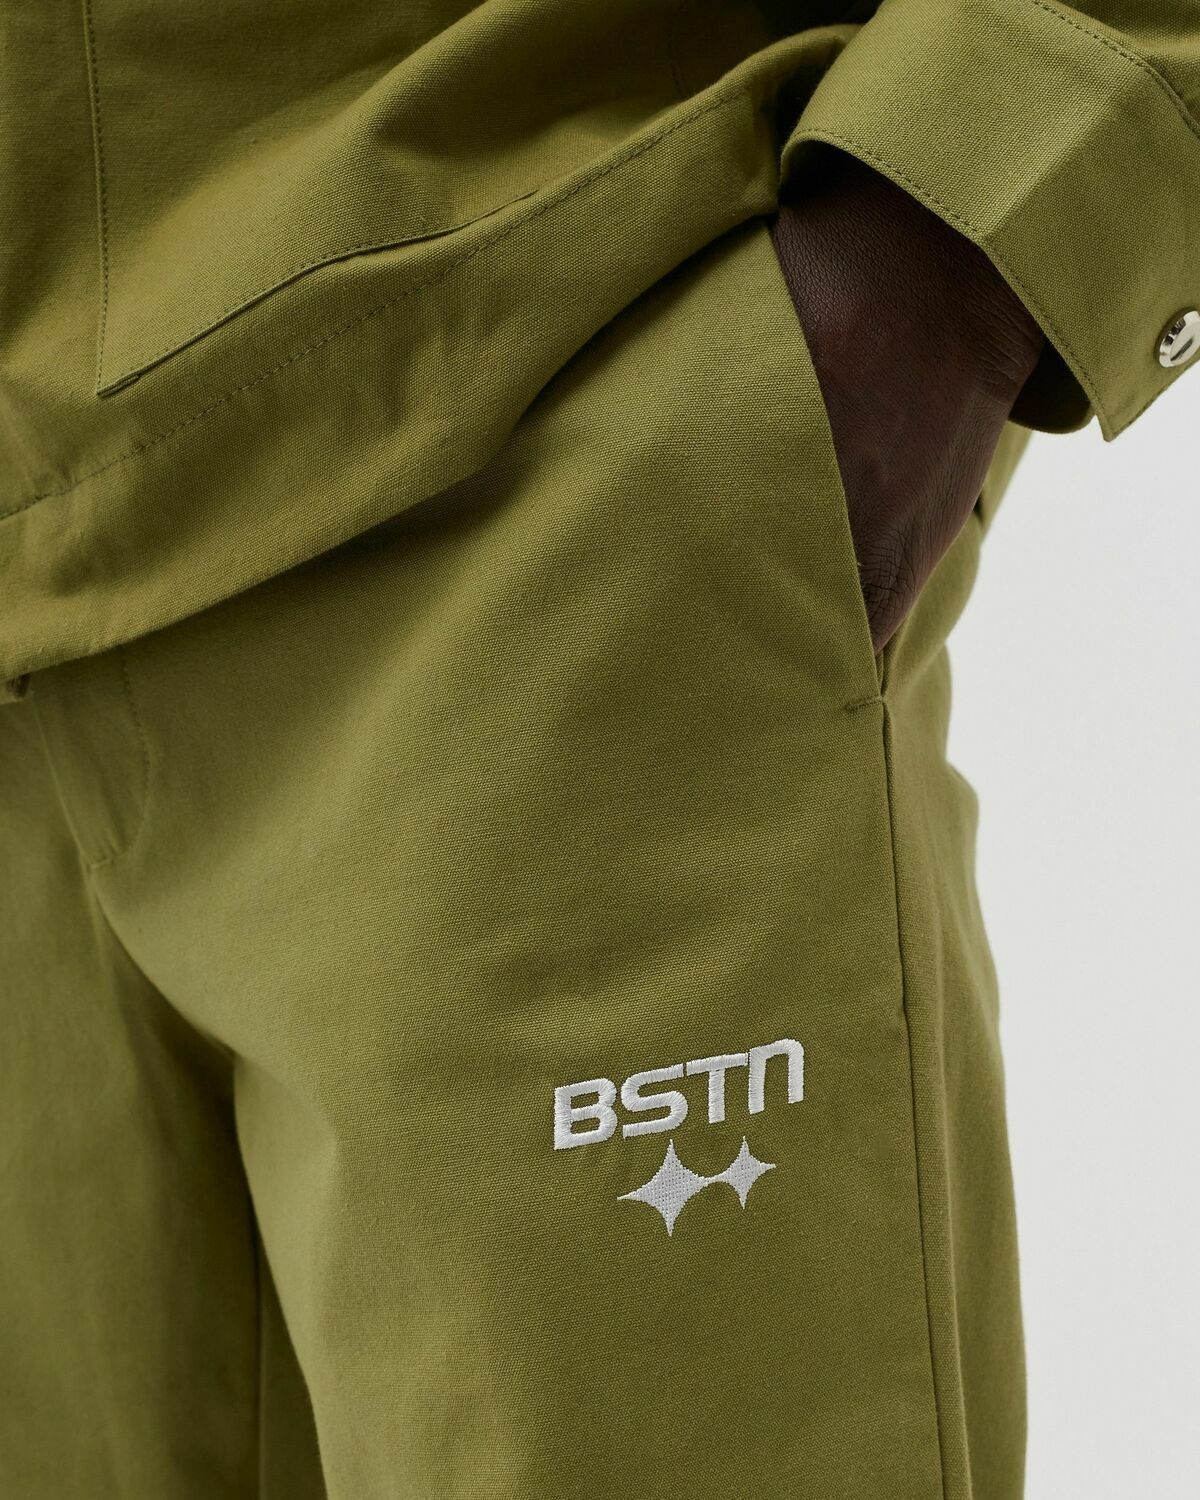 Bstn Brand Workwear Warm Up Pants Green - Mens - Casual Pants